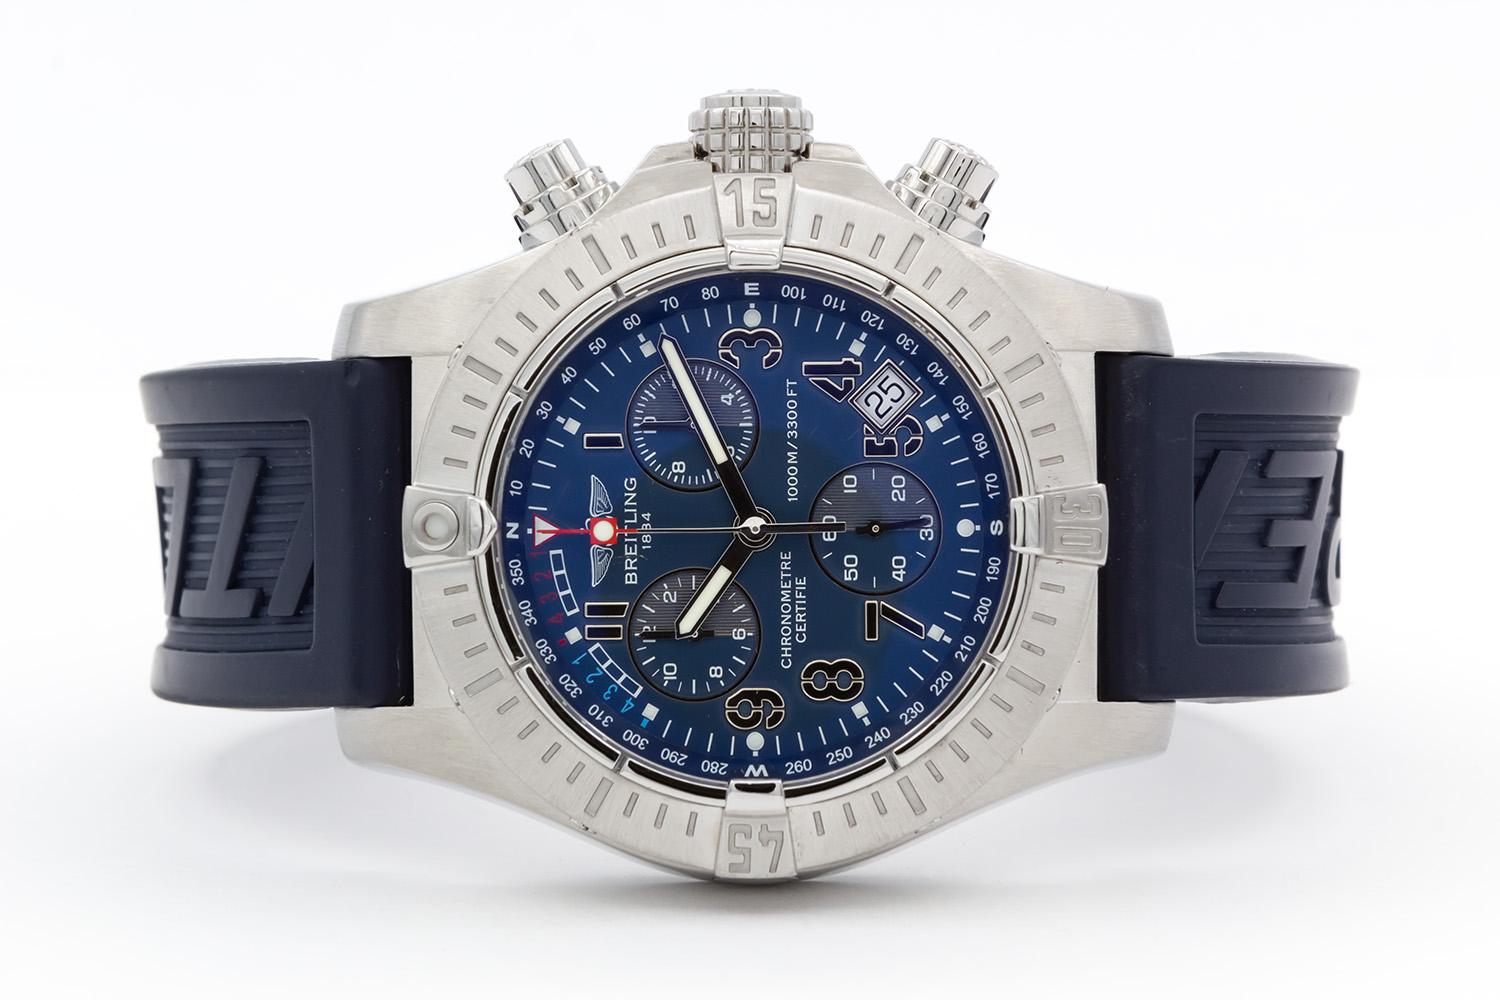 We are pleased to offer this Breitling Avenger Seawolf A73390 which was just polished and overhauled by Breitling. This watch features a 45.4mm stainless steel case, blue rubber Breitling strap, beautiful blue dial and quartz chronograph movement